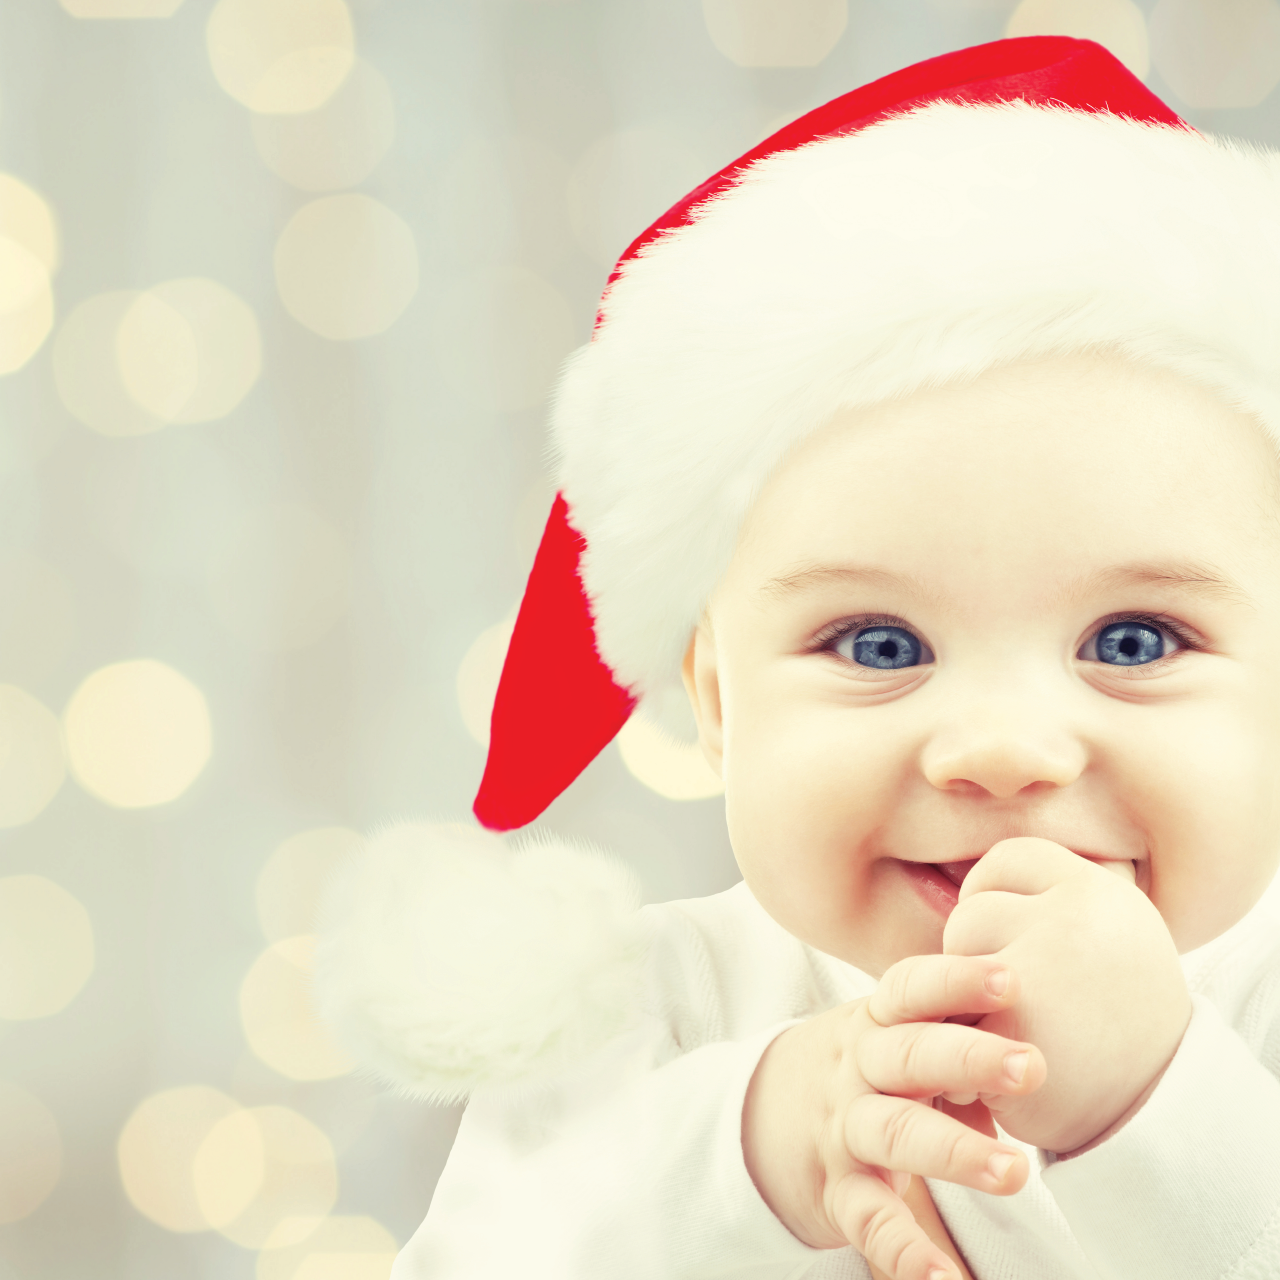 Activities to make your baby's first Christmas special